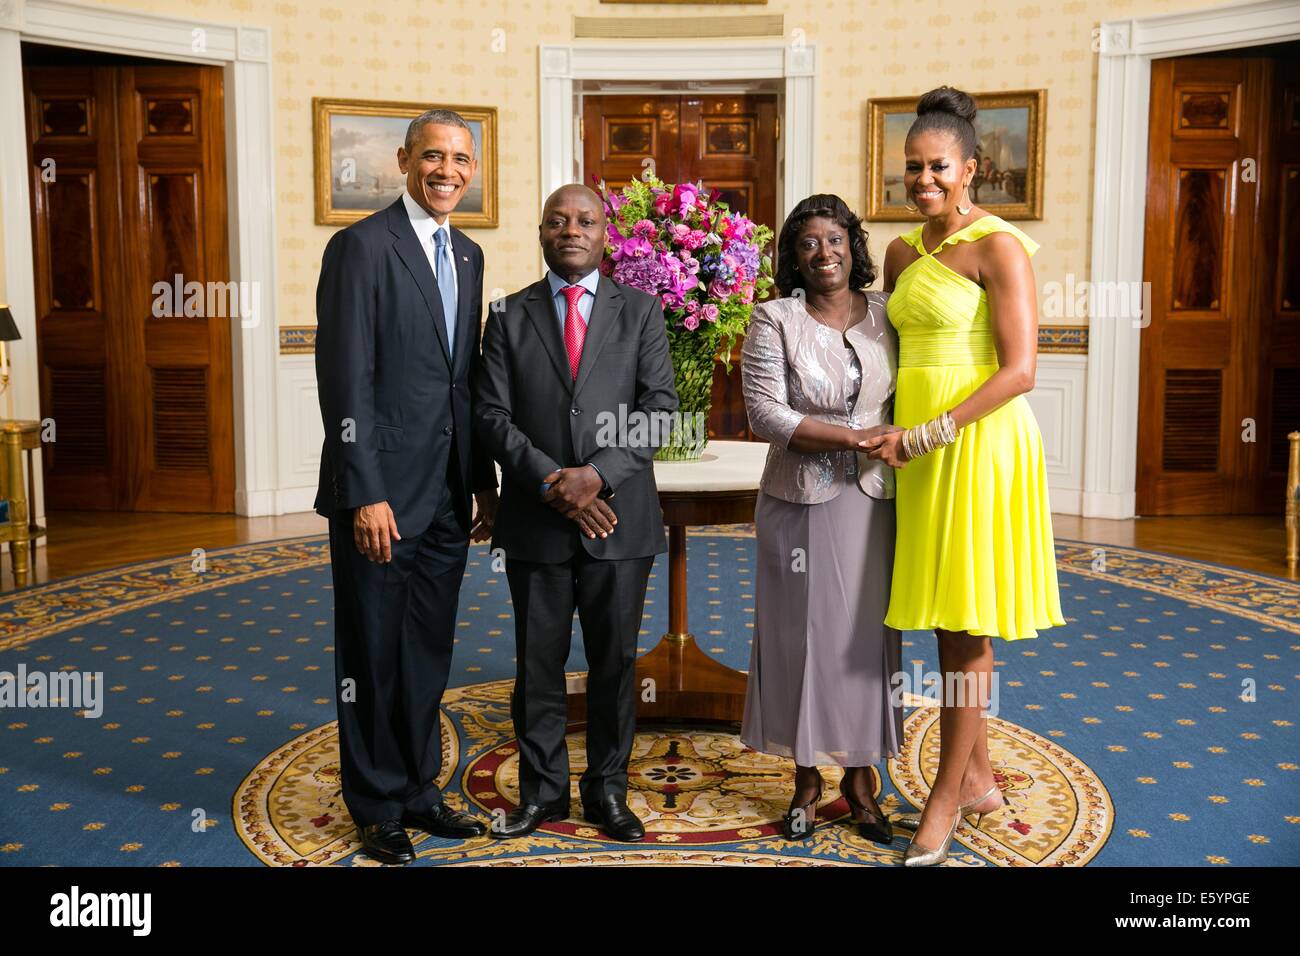 US President Barack Obama and First Lady Michelle Obama pose with JosŽ M‡rio Vaz, President of the Republic of Guinea-Bissau, and his wife Rosa Teixeira Goudiaby Vaz, in the Blue Room of the White House before the U.S.-Africa Leaders Summit dinner August 5, 2014 in Washington, DC. Stock Photo